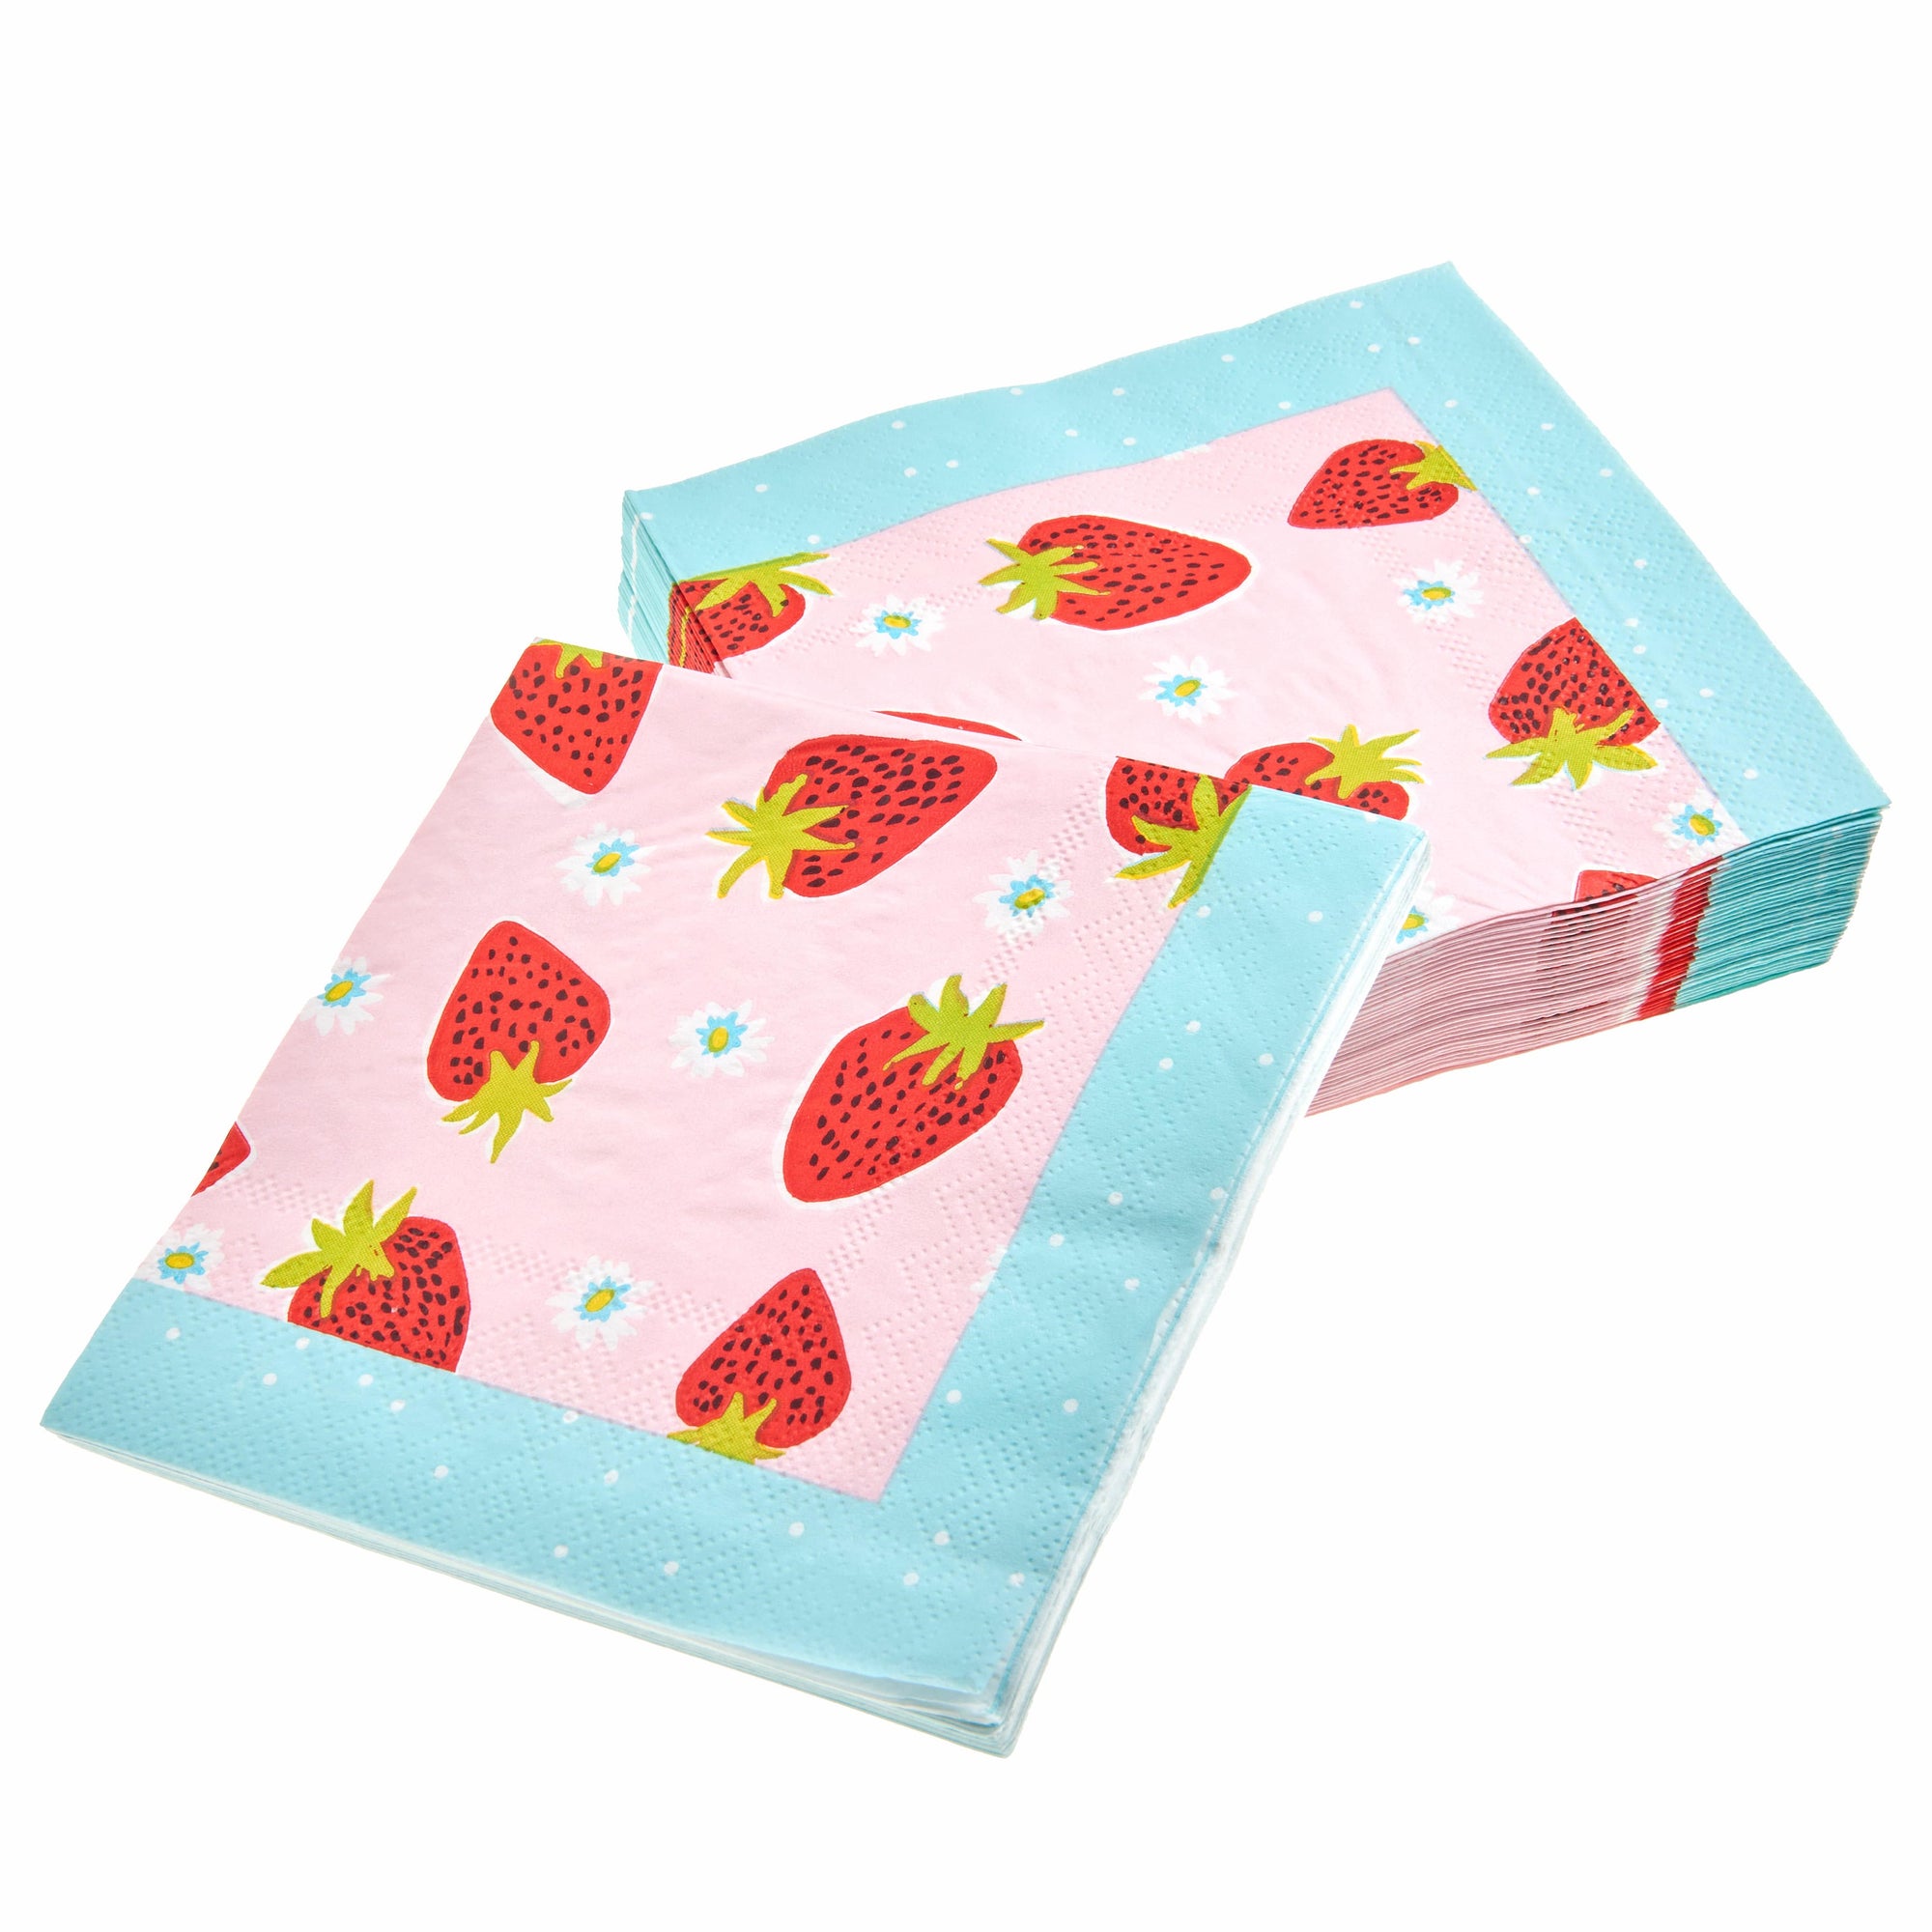 Strawberry Cocktail Napkins - 40 Count Roobee Napkins 89213